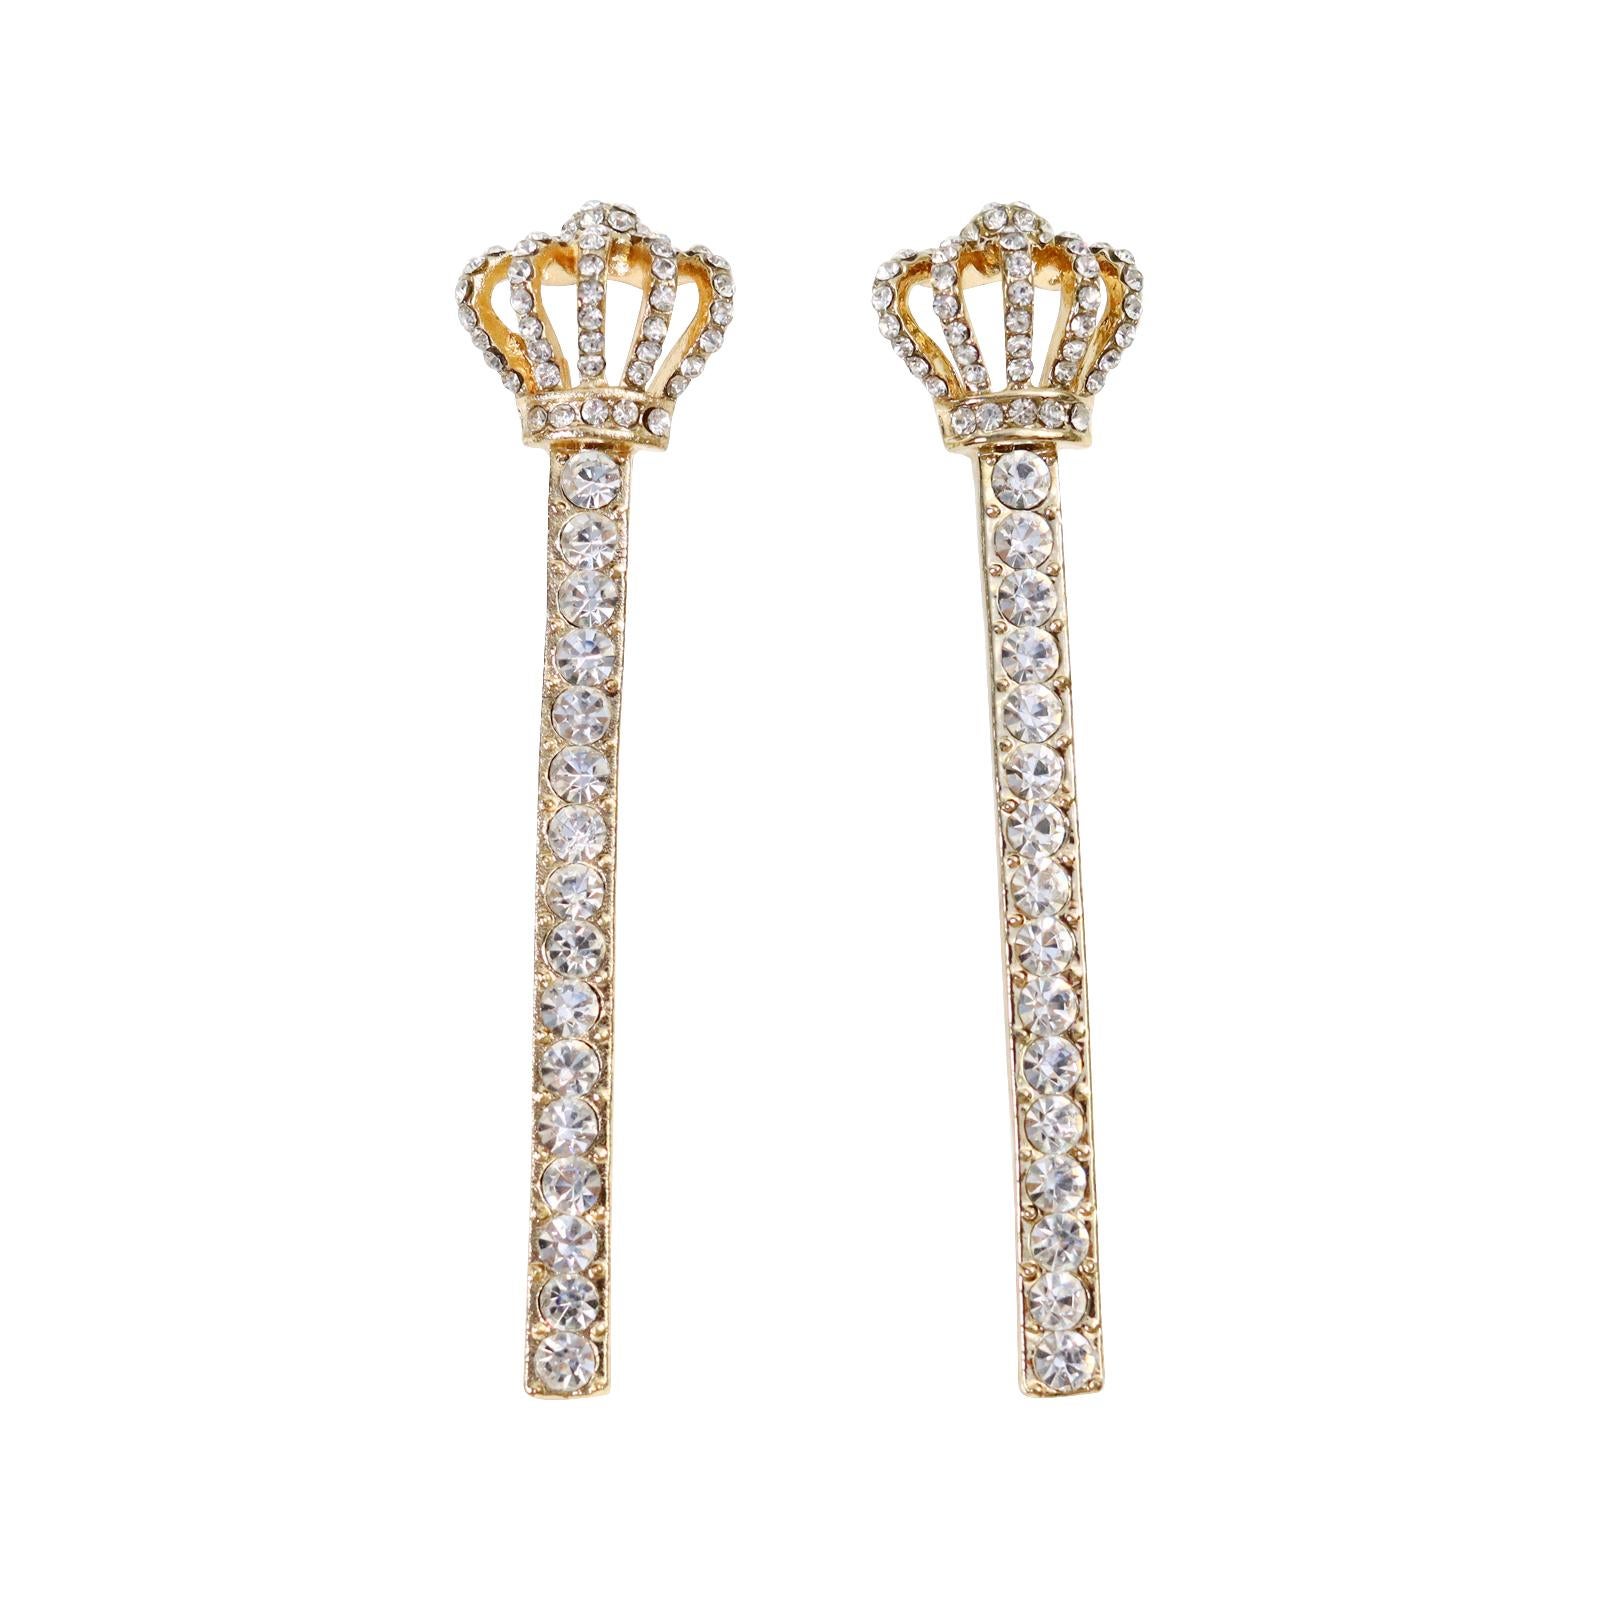 Vintage Gold Tone Crown Diamante Earrings Circa 1990s.  These great earrings have a crown at the top and then have round diamantes going all the way down.  This is a rigid piece and does not move so its so chic the way it presents.  The crown is